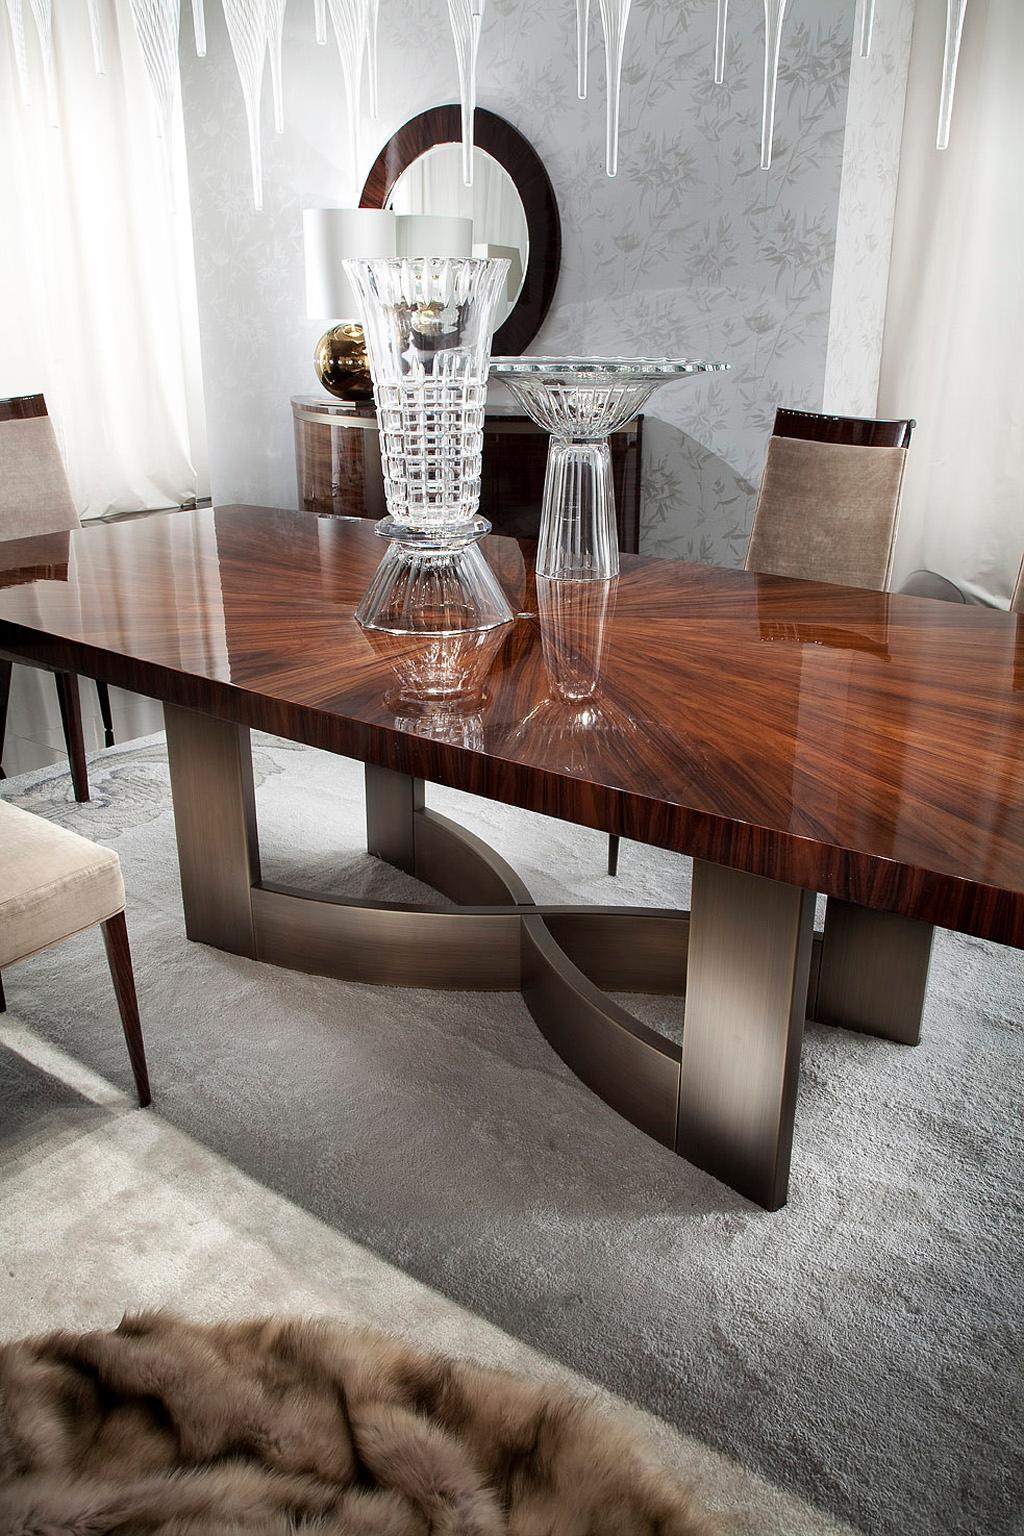 Rectangular table in Brazilian rosewood veneer with high
gloss polyester finish. Fixed top with base in bronzed stain-
less steel. Sunburst veneer top with “Giorgio Collection”
inserted brass logo.

This item is only available to purchase in the